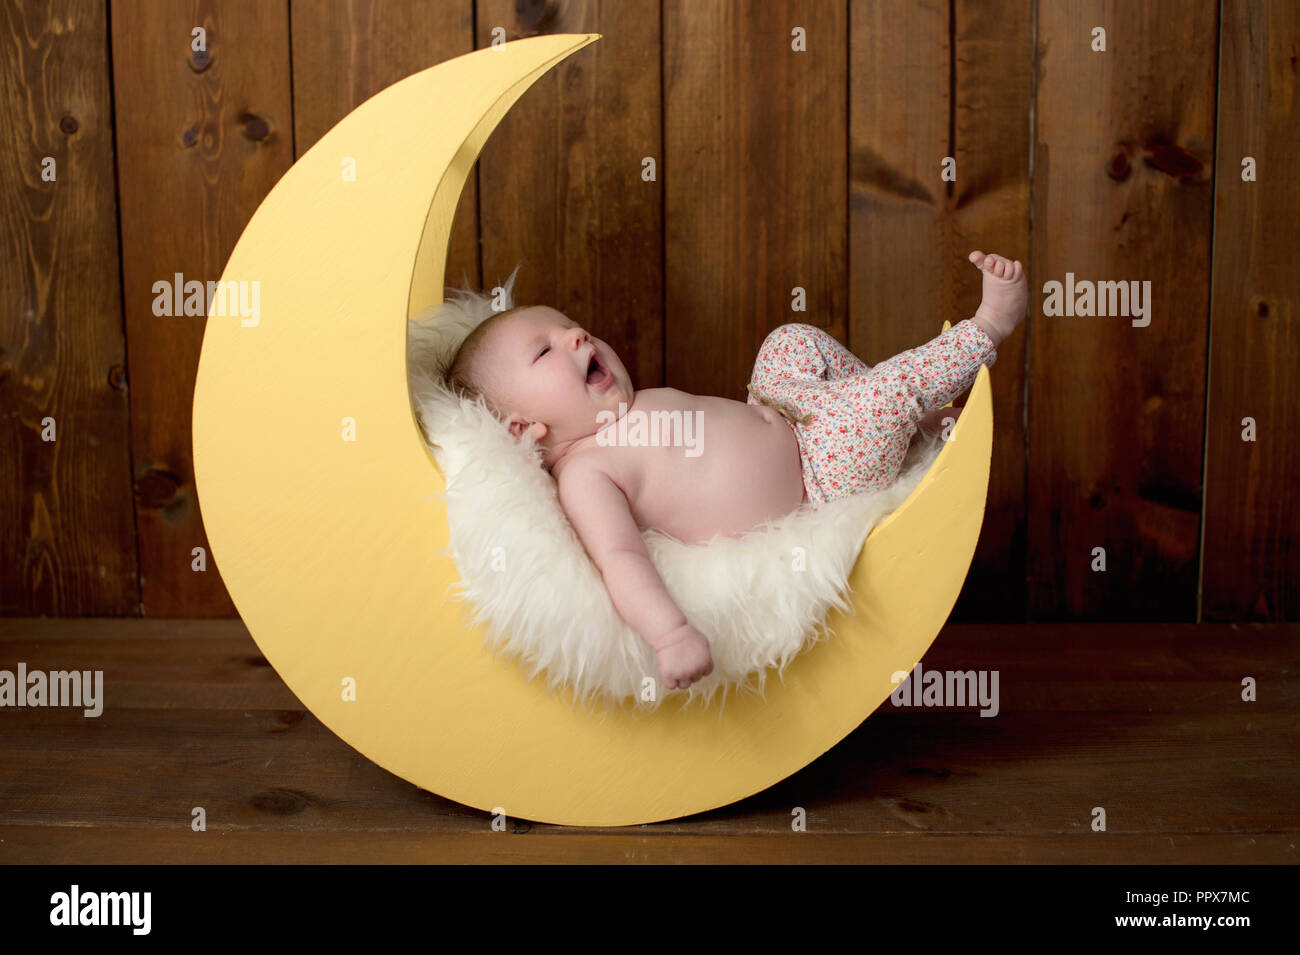 Studio portrait of a yawning, one month old baby girl lying on a moon shaped posing prop. Stock Photo